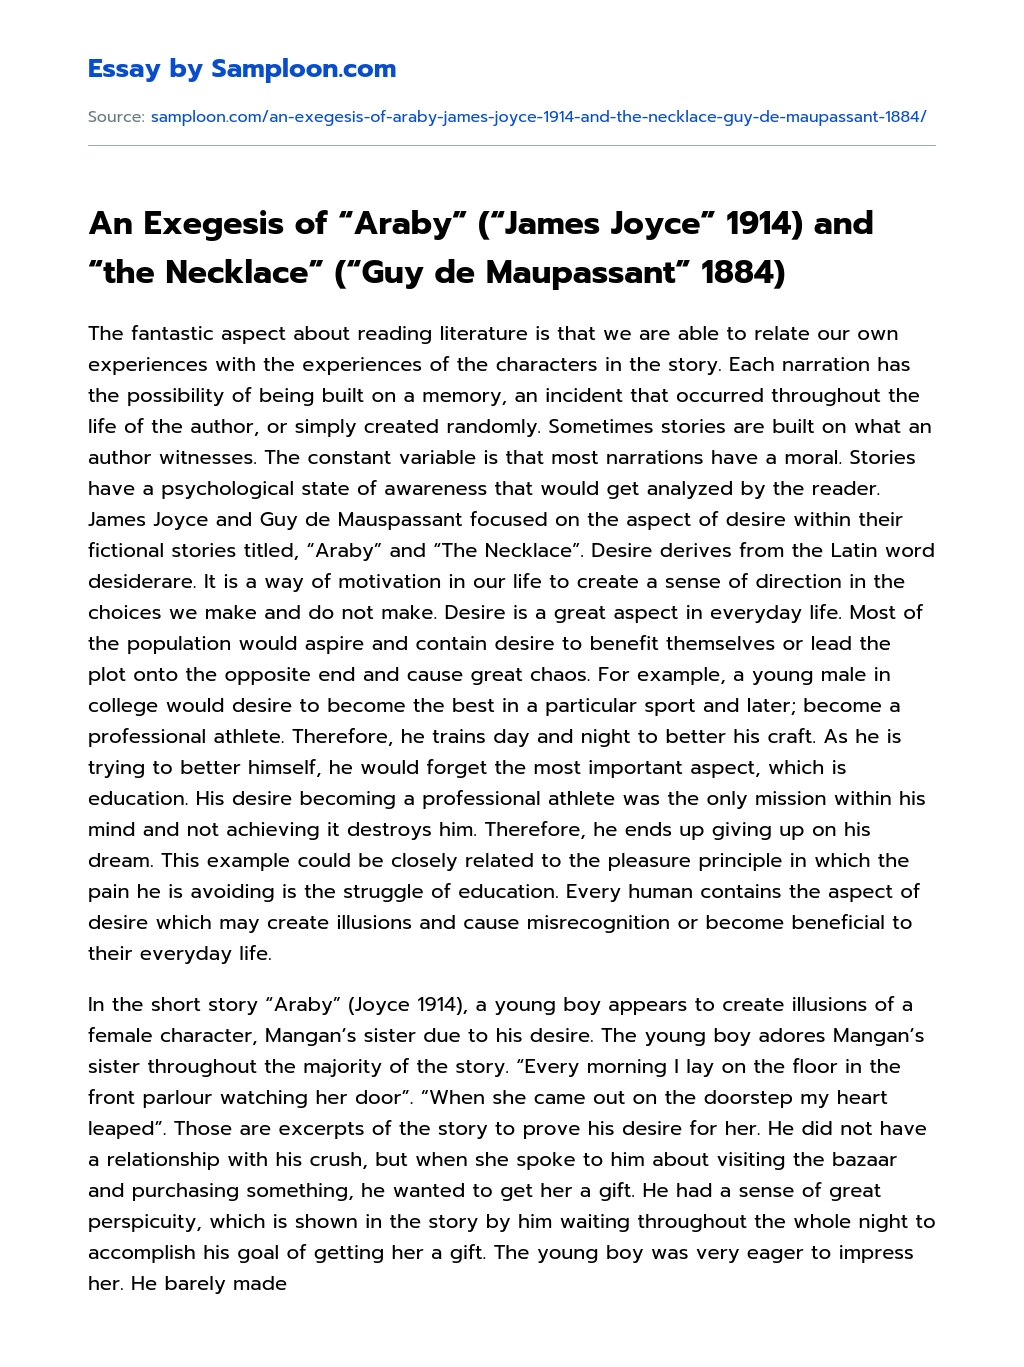 An Exegesis of “Araby” (“James Joyce” 1914) and “the Necklace” (“Guy de Maupassant” 1884) essay